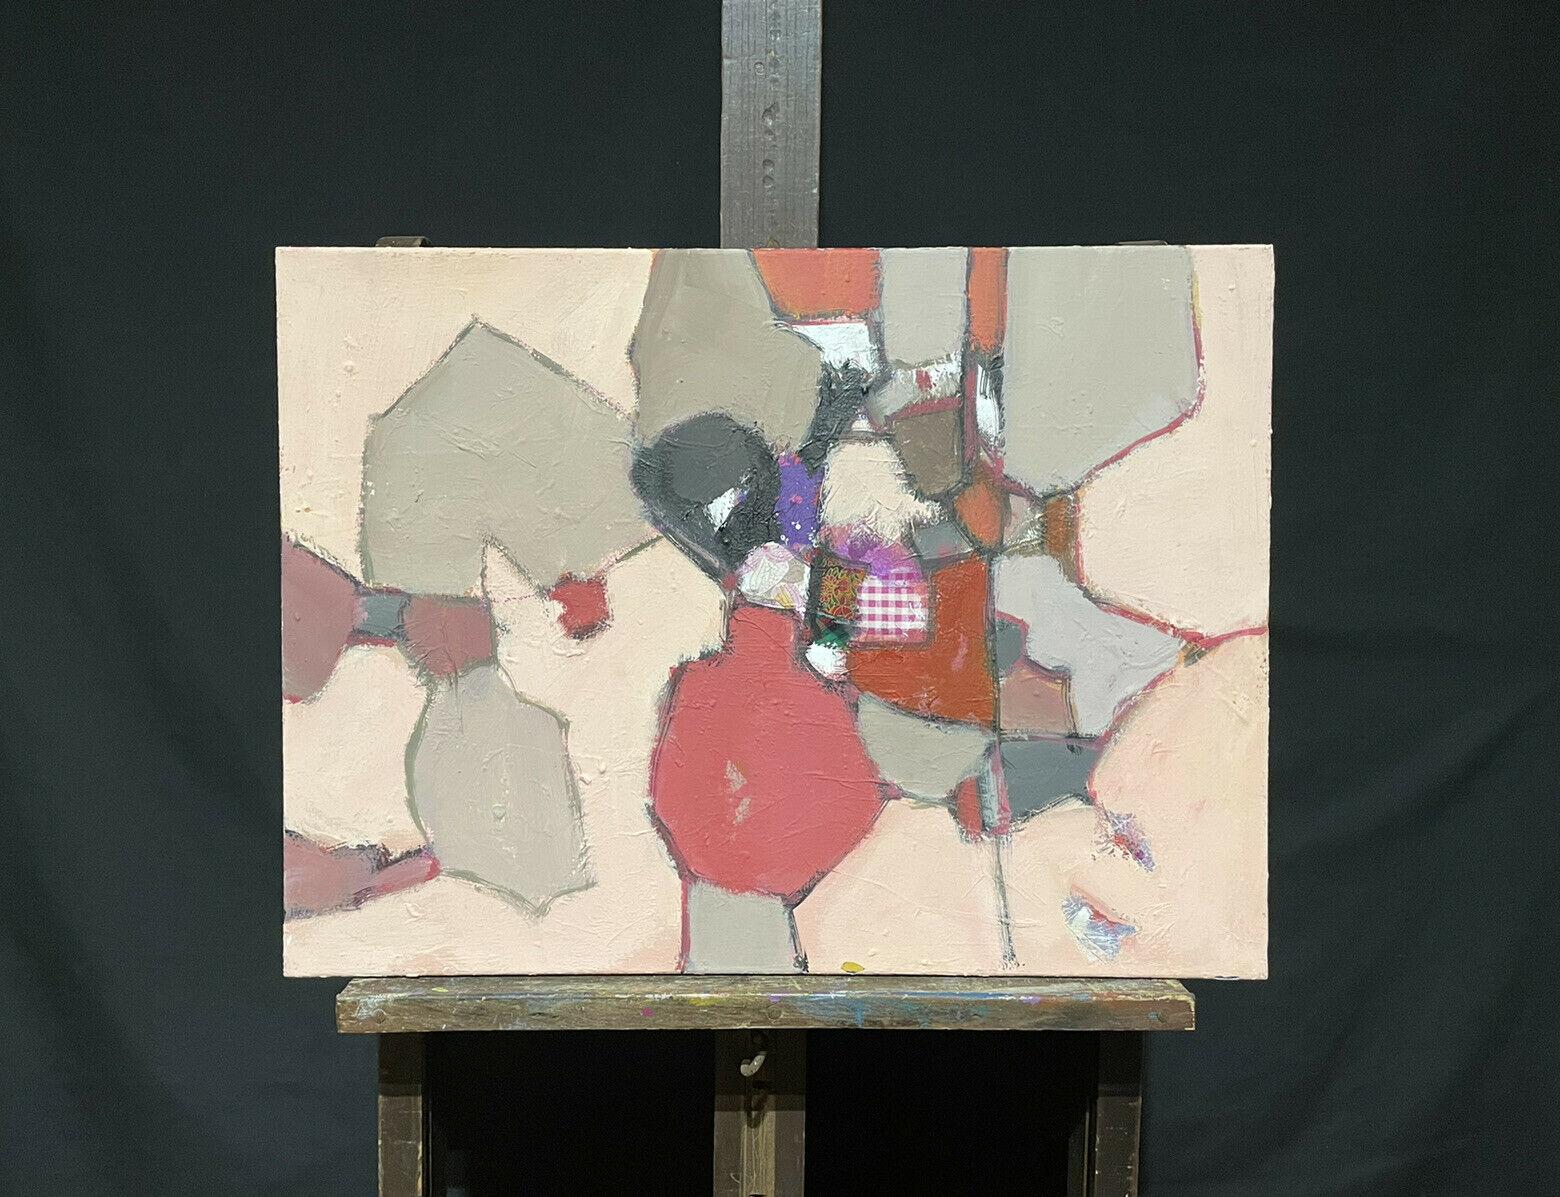 LEROY - FRENCH CONTEMPORARY ABSTRACT CUBIST PAINTING WITH COLLAGE - Painting by R.Leroy